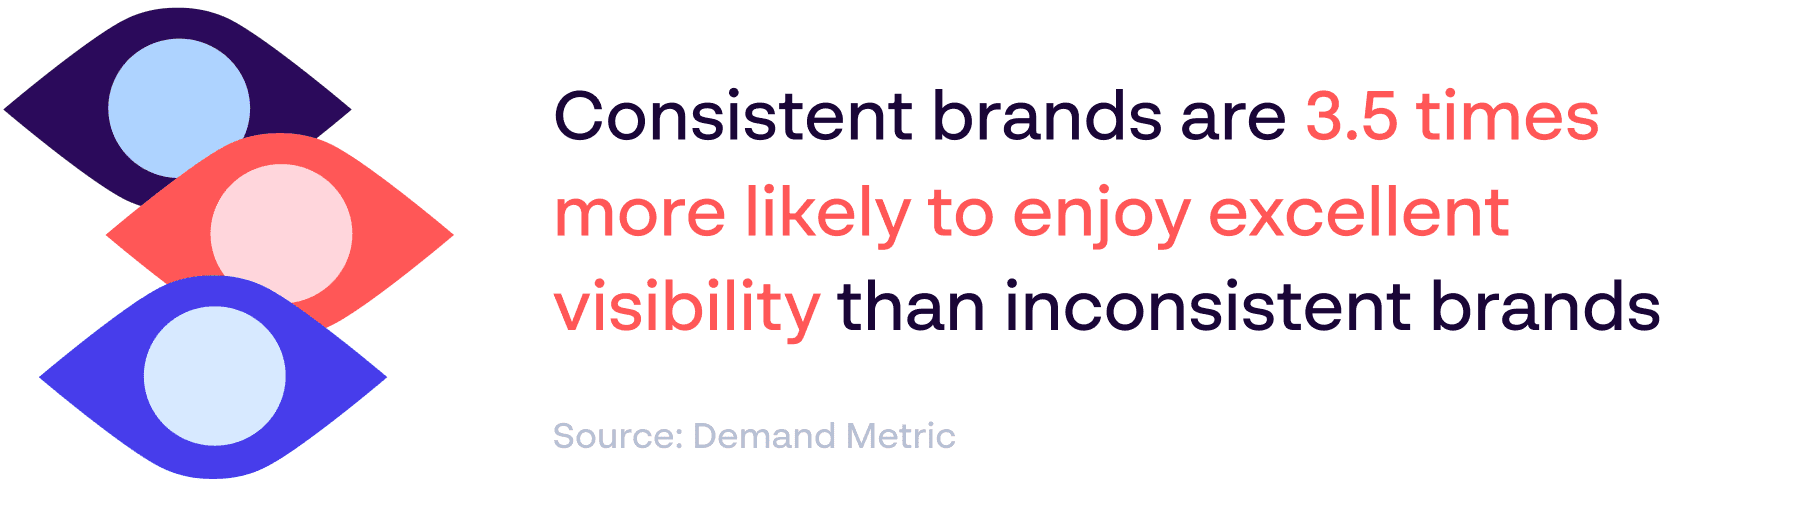 “Brand visibility statistic showing how consistent brands are 3.5 times more visible than inconsistent brands. Source: Demand Metric”